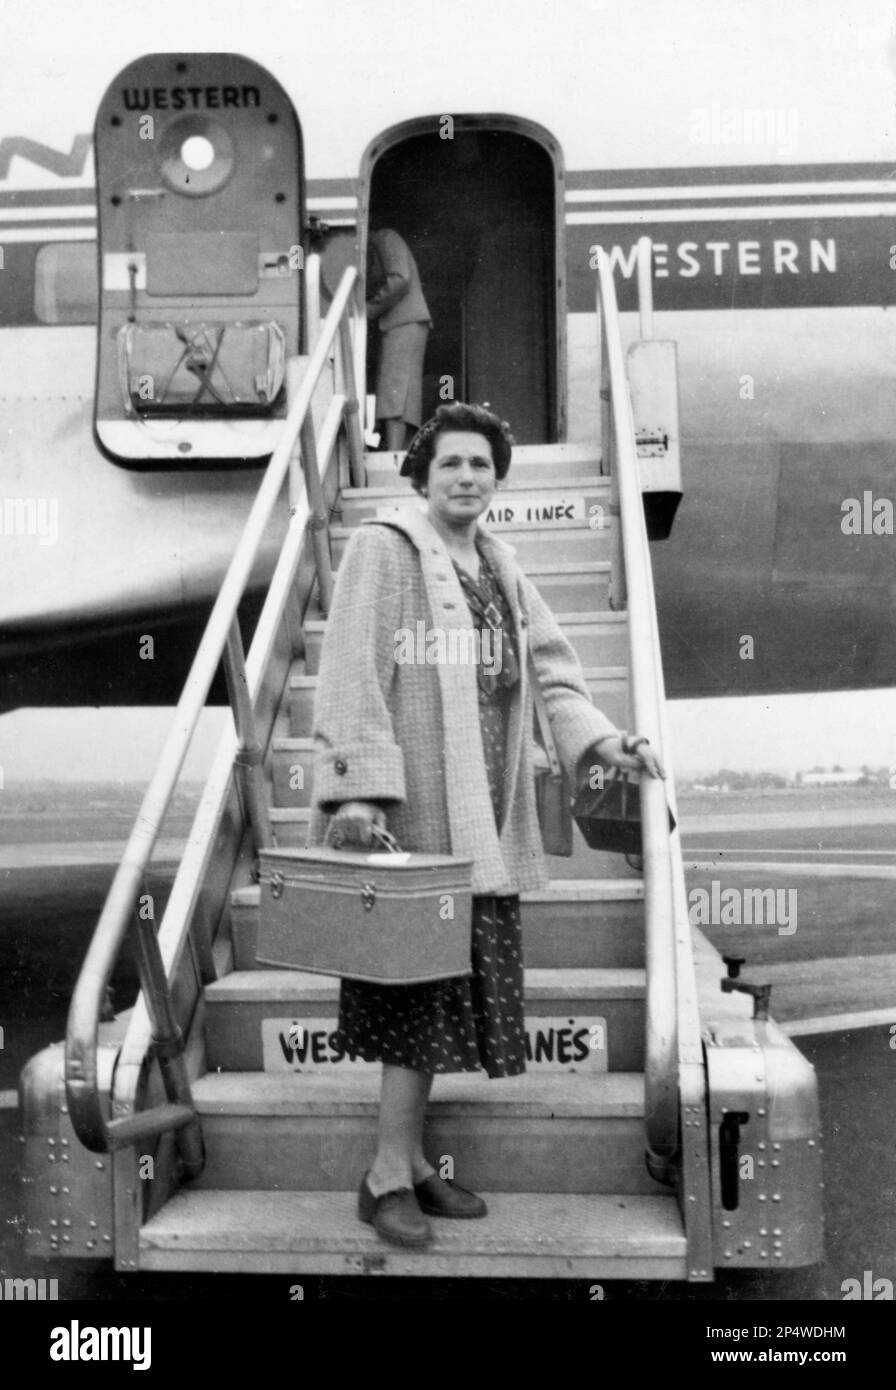 Air Travel, 1950s Travel, Western Airlines, Woman getting ready to board airplane Stock Photo